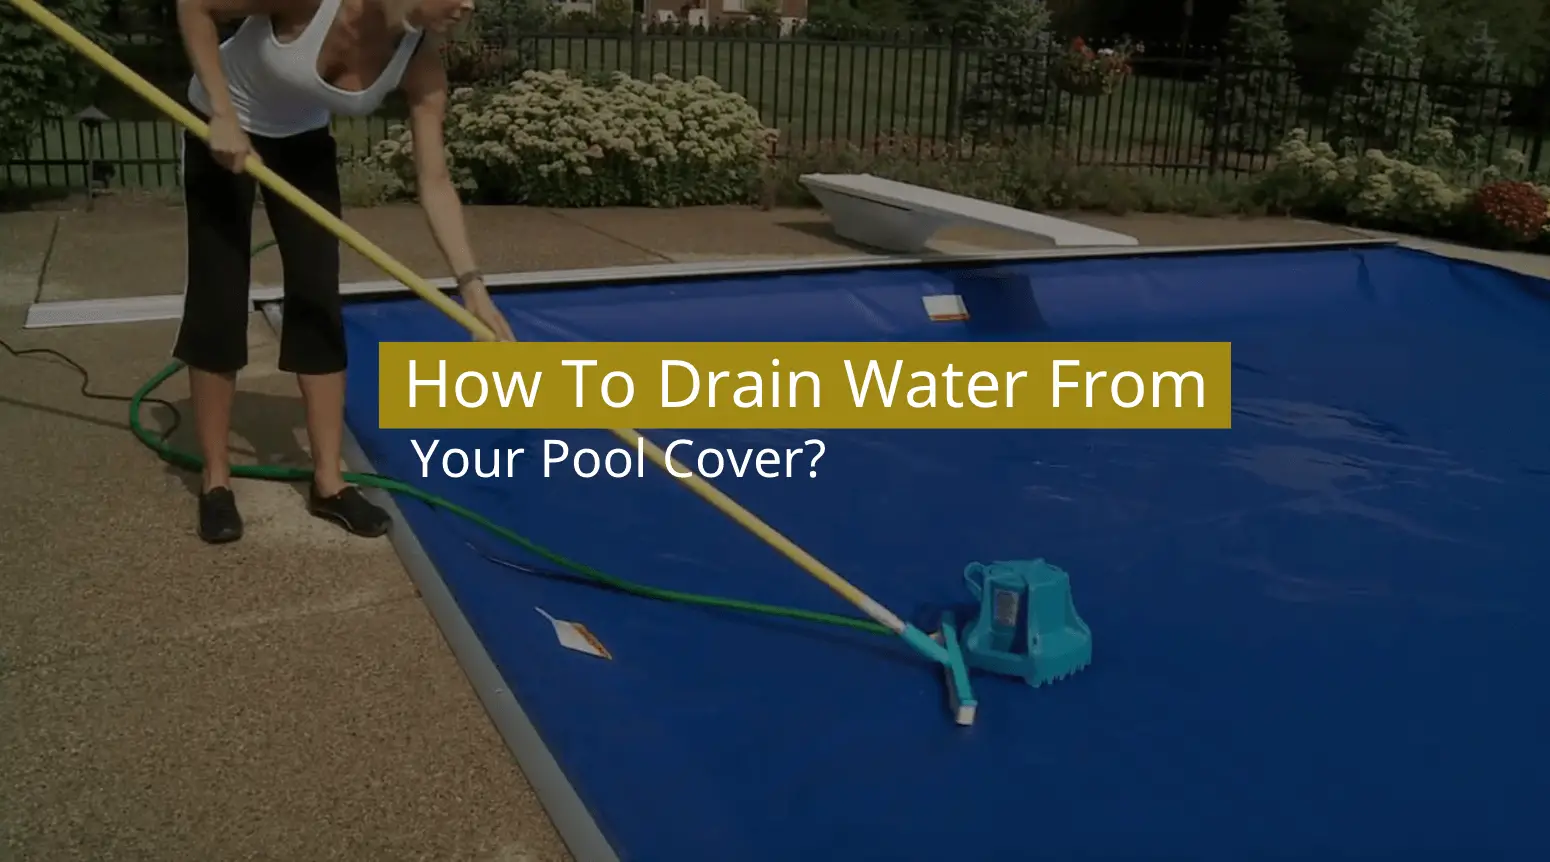 How To Drain Water From Your Pool Cover?